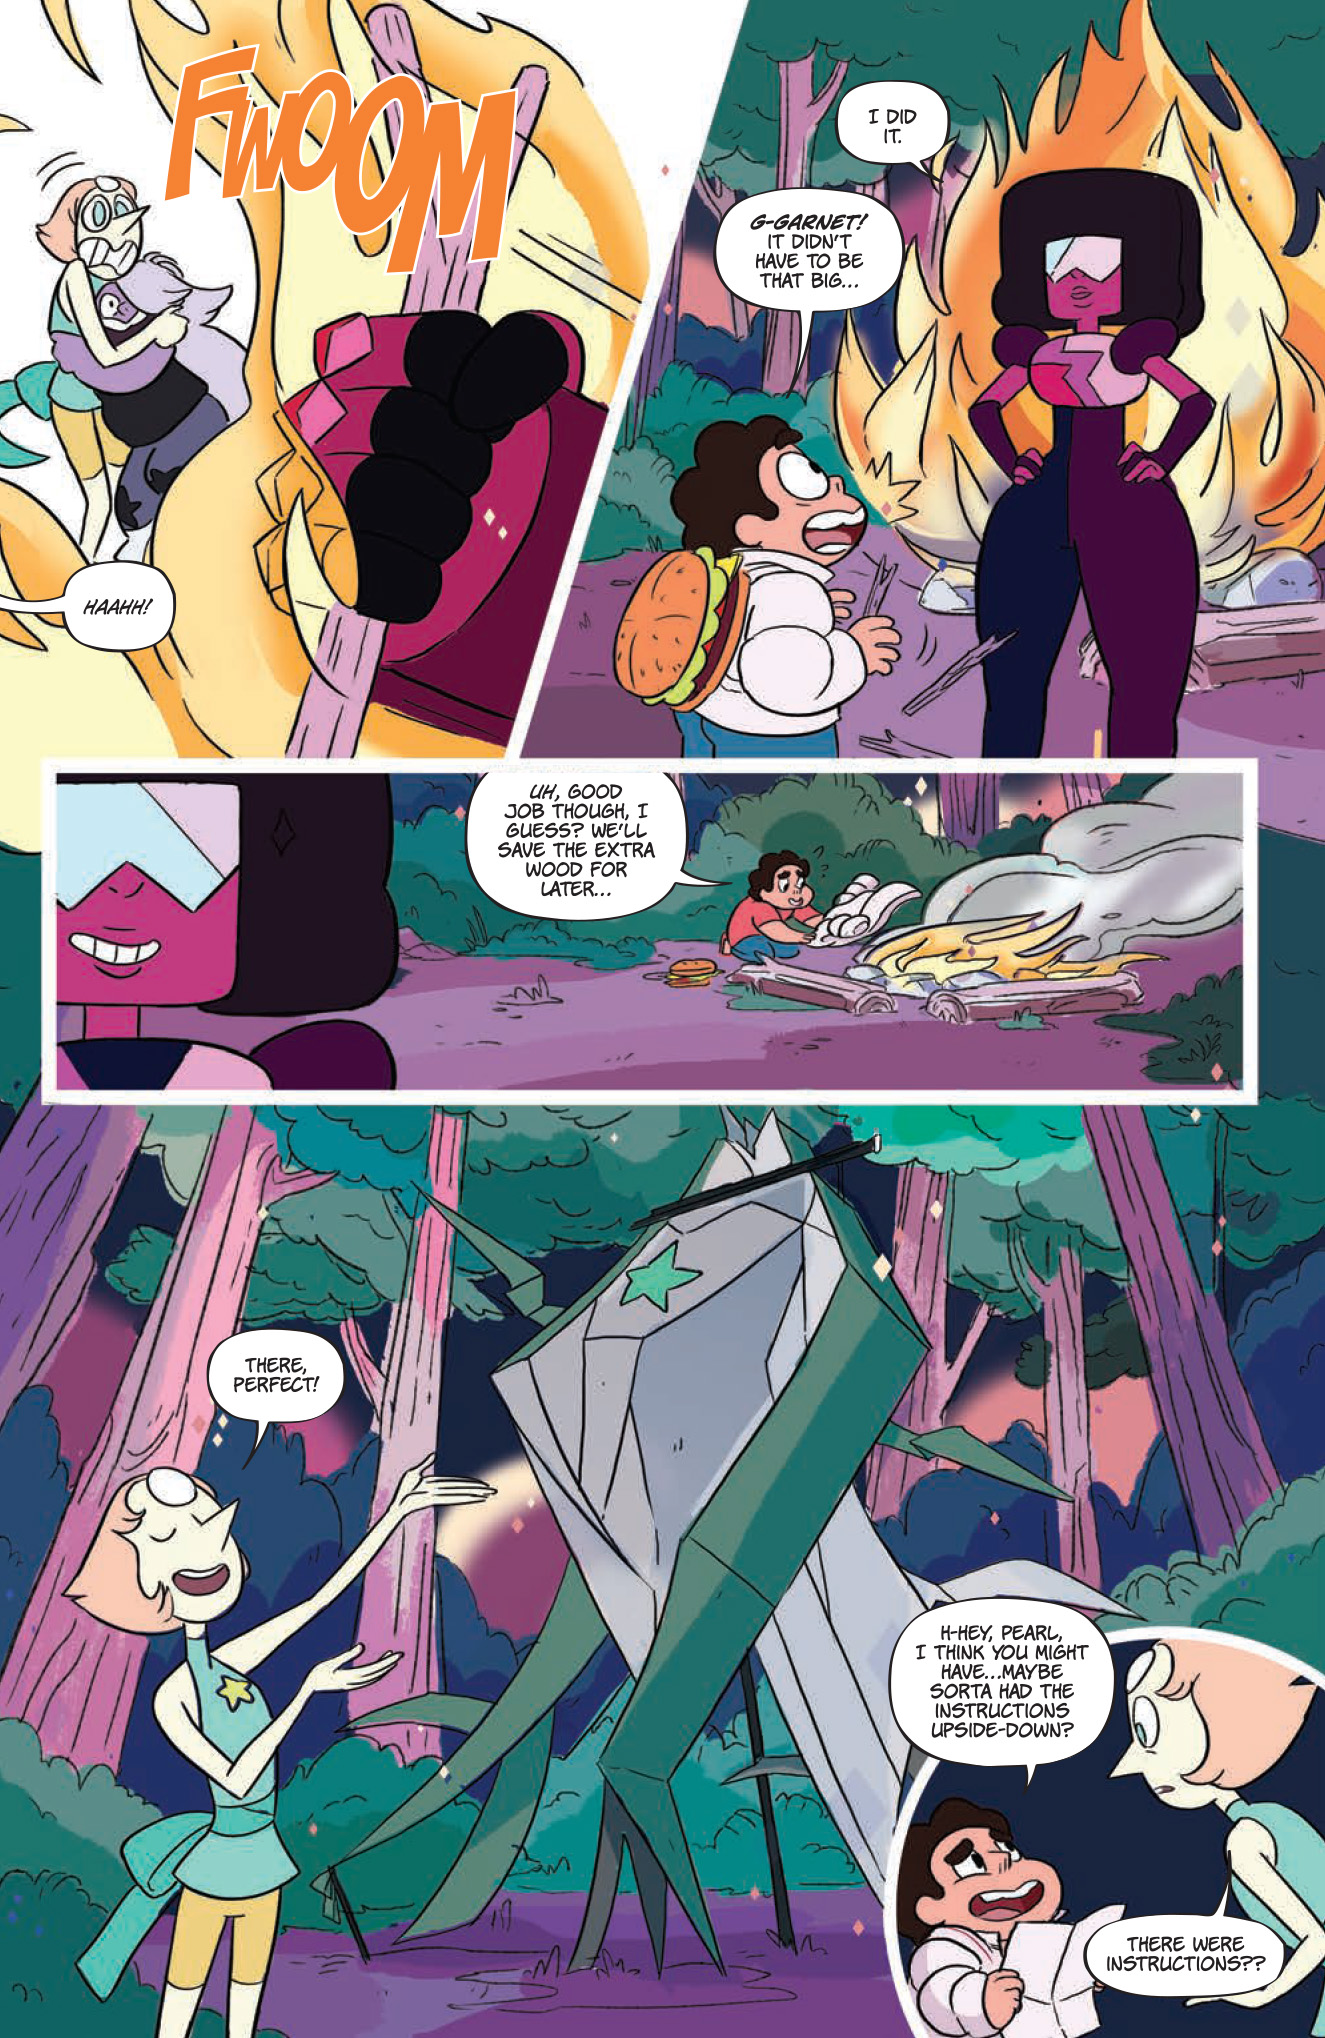 Steven Universe and The Crystal Gems #1 | Fresh Comics